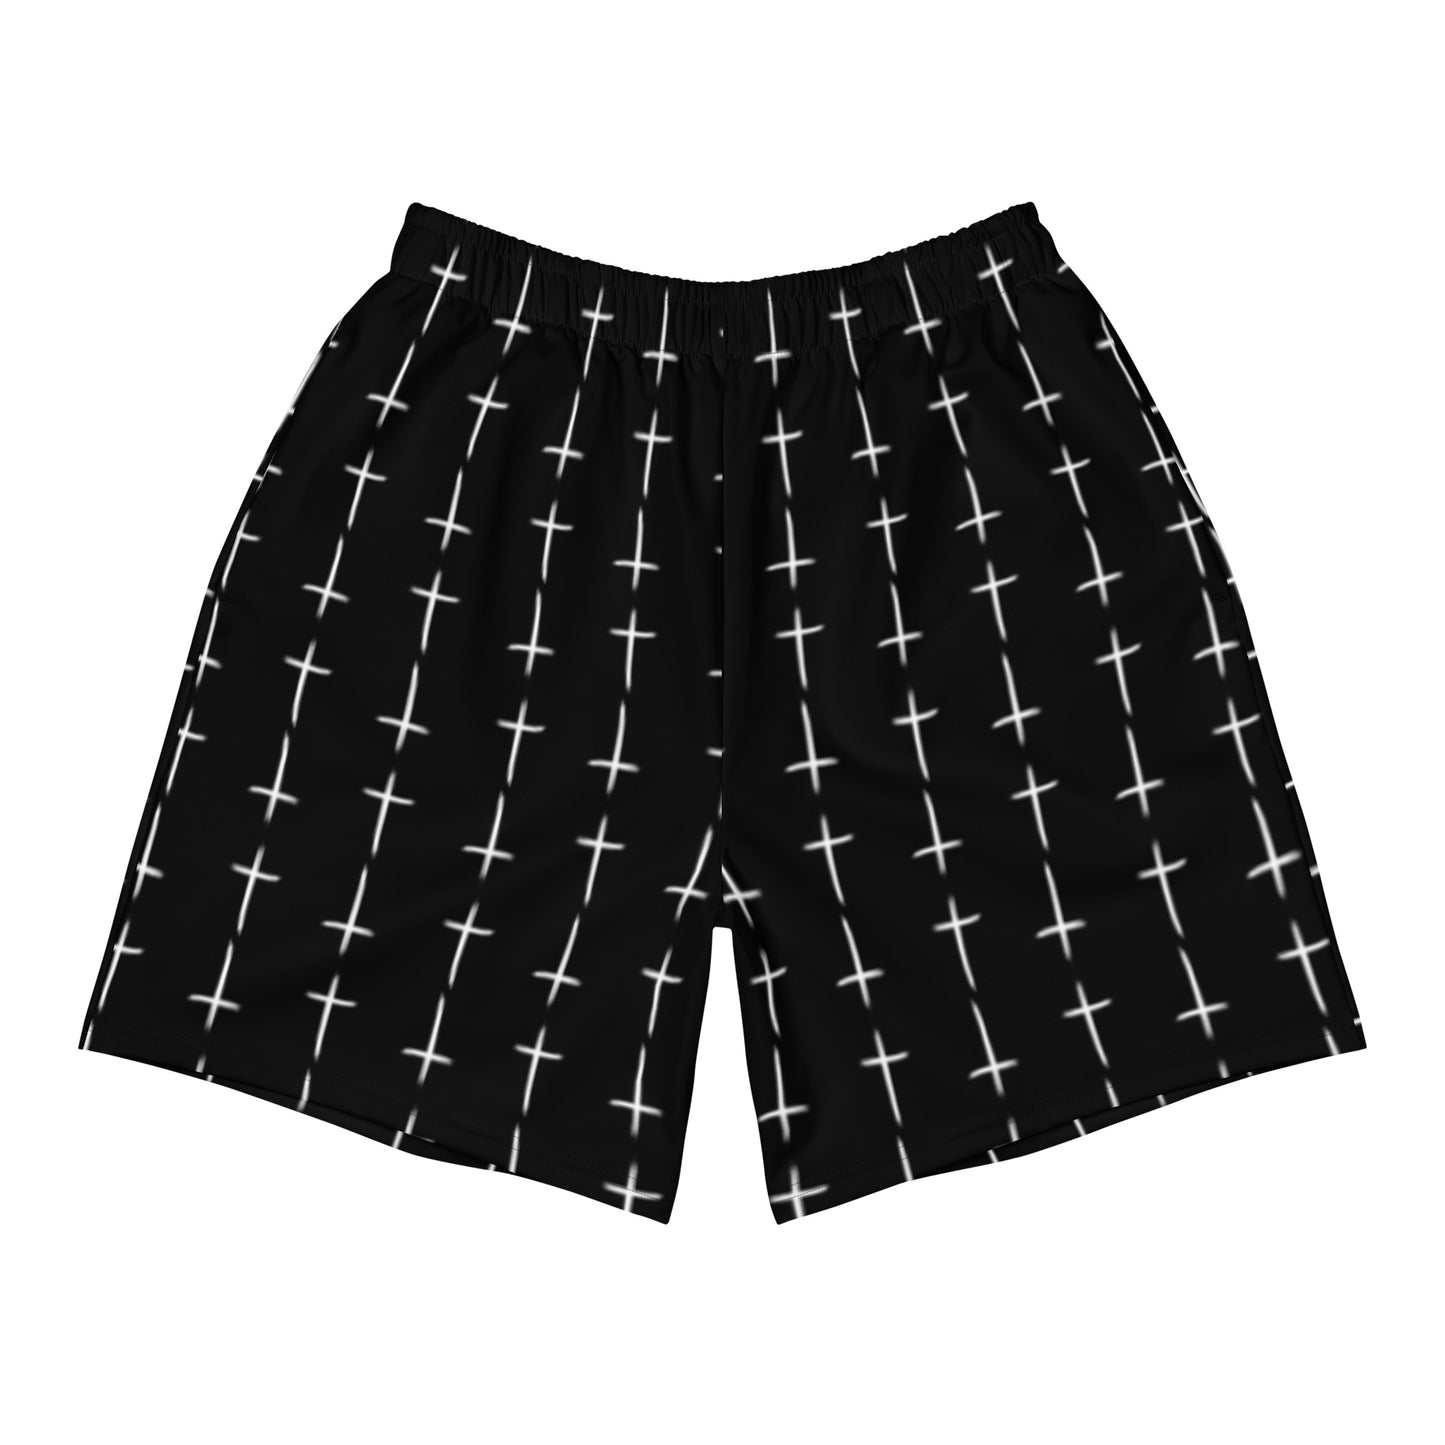 HEAVEN/HELL ATHLETIC SHORTS